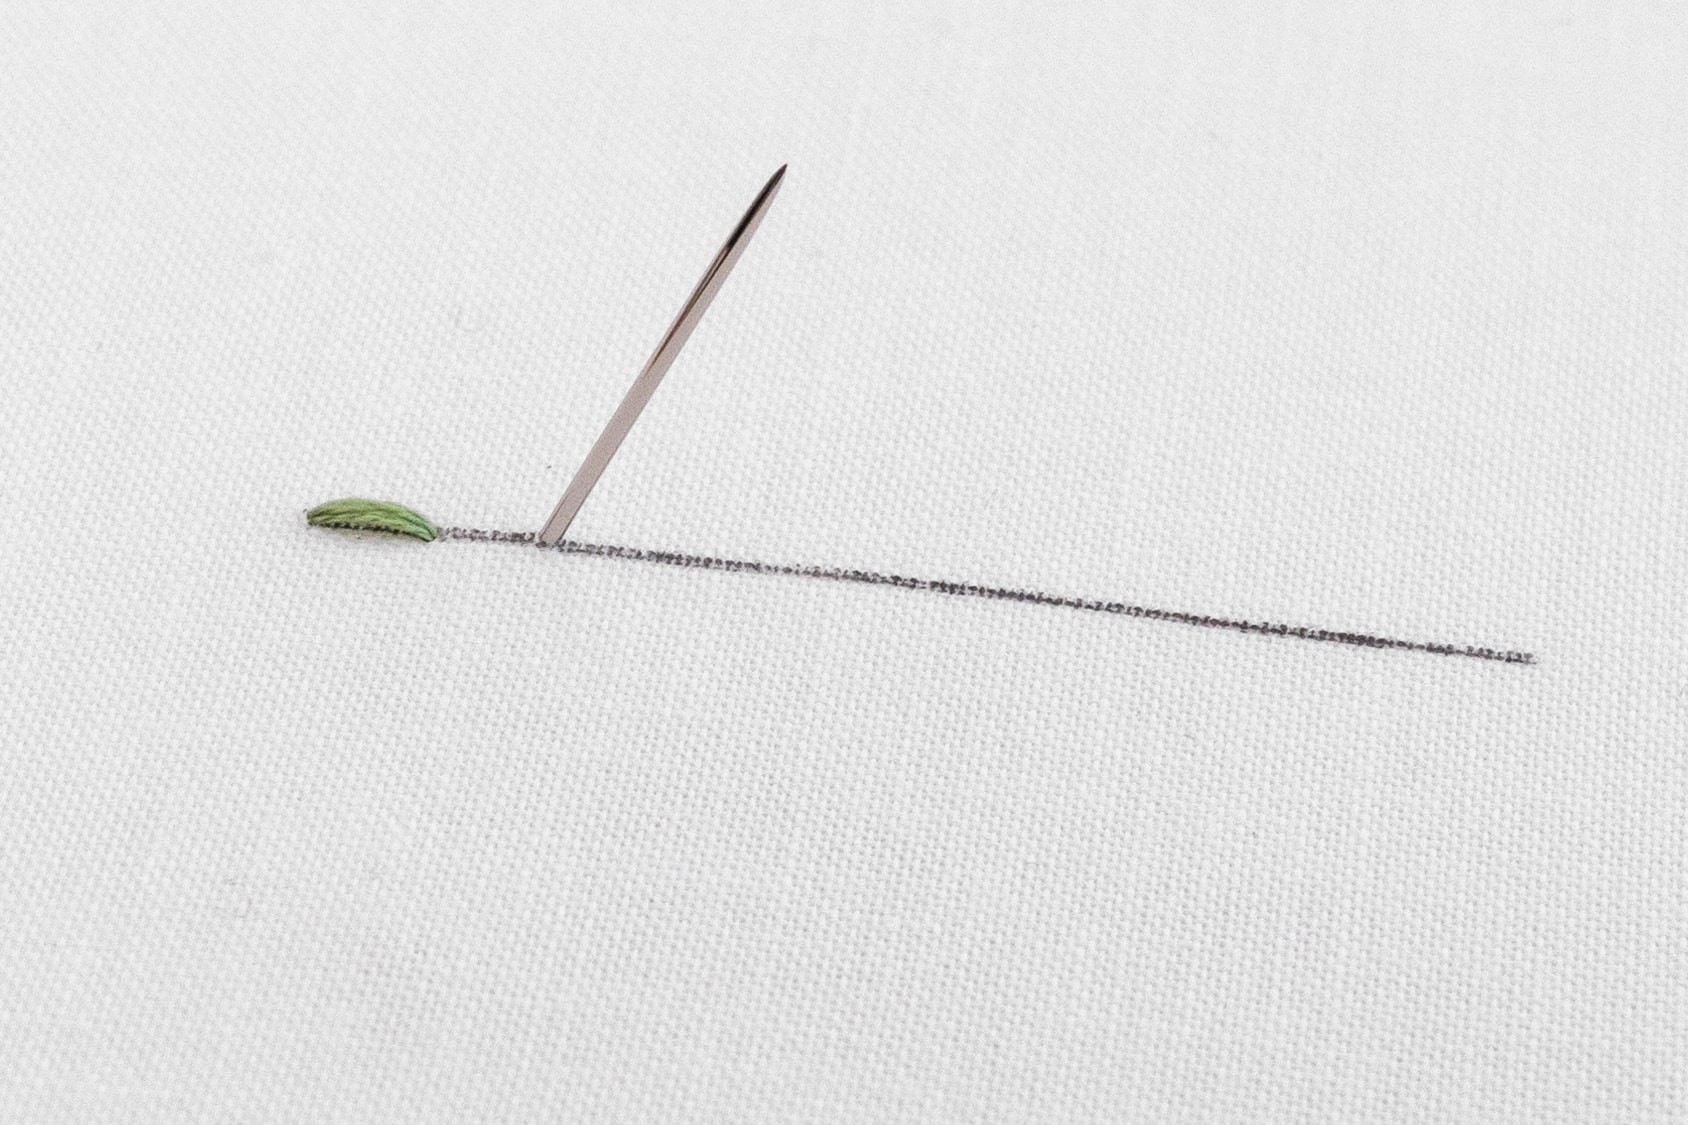 The needle is poked through the back of the embroidery fabric.